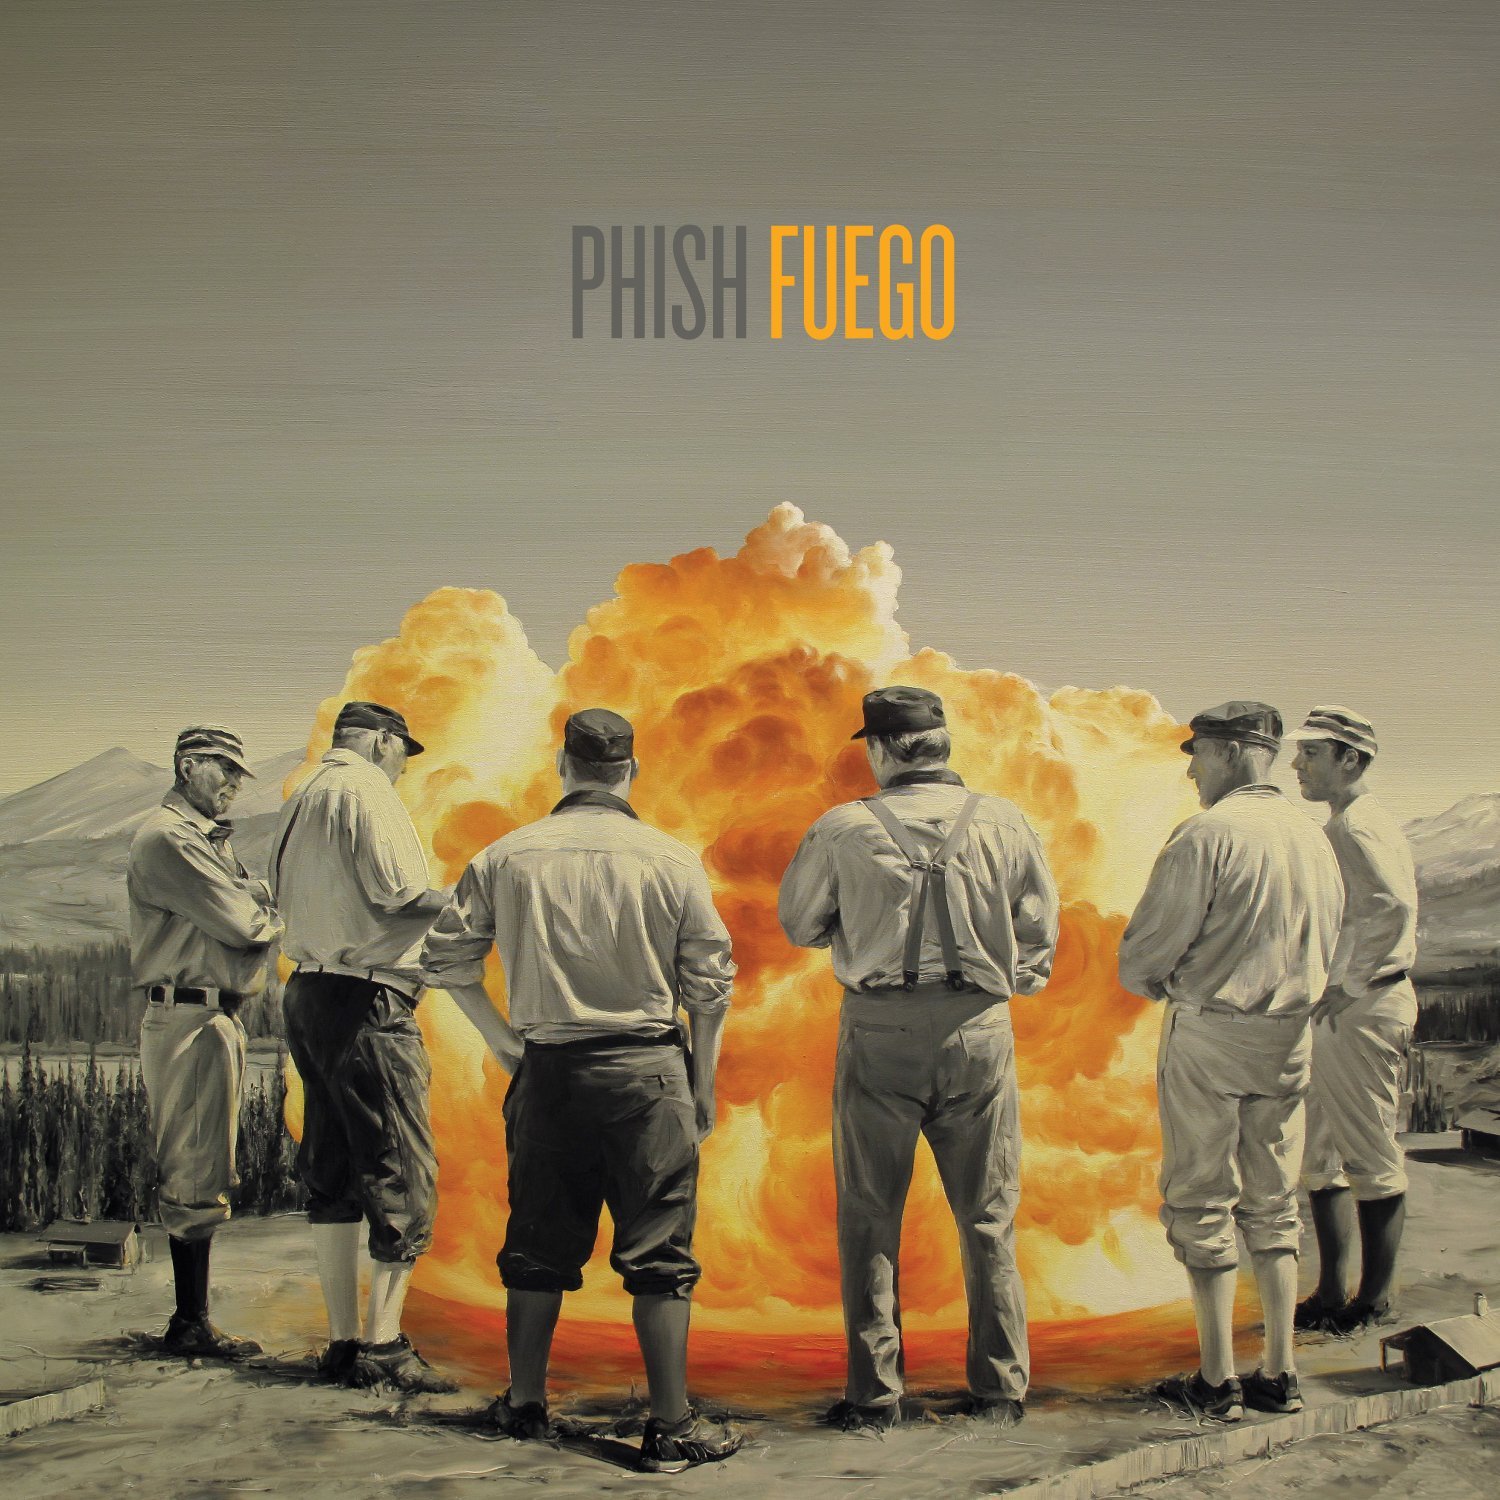 Phish's 'Fuego' is out now.